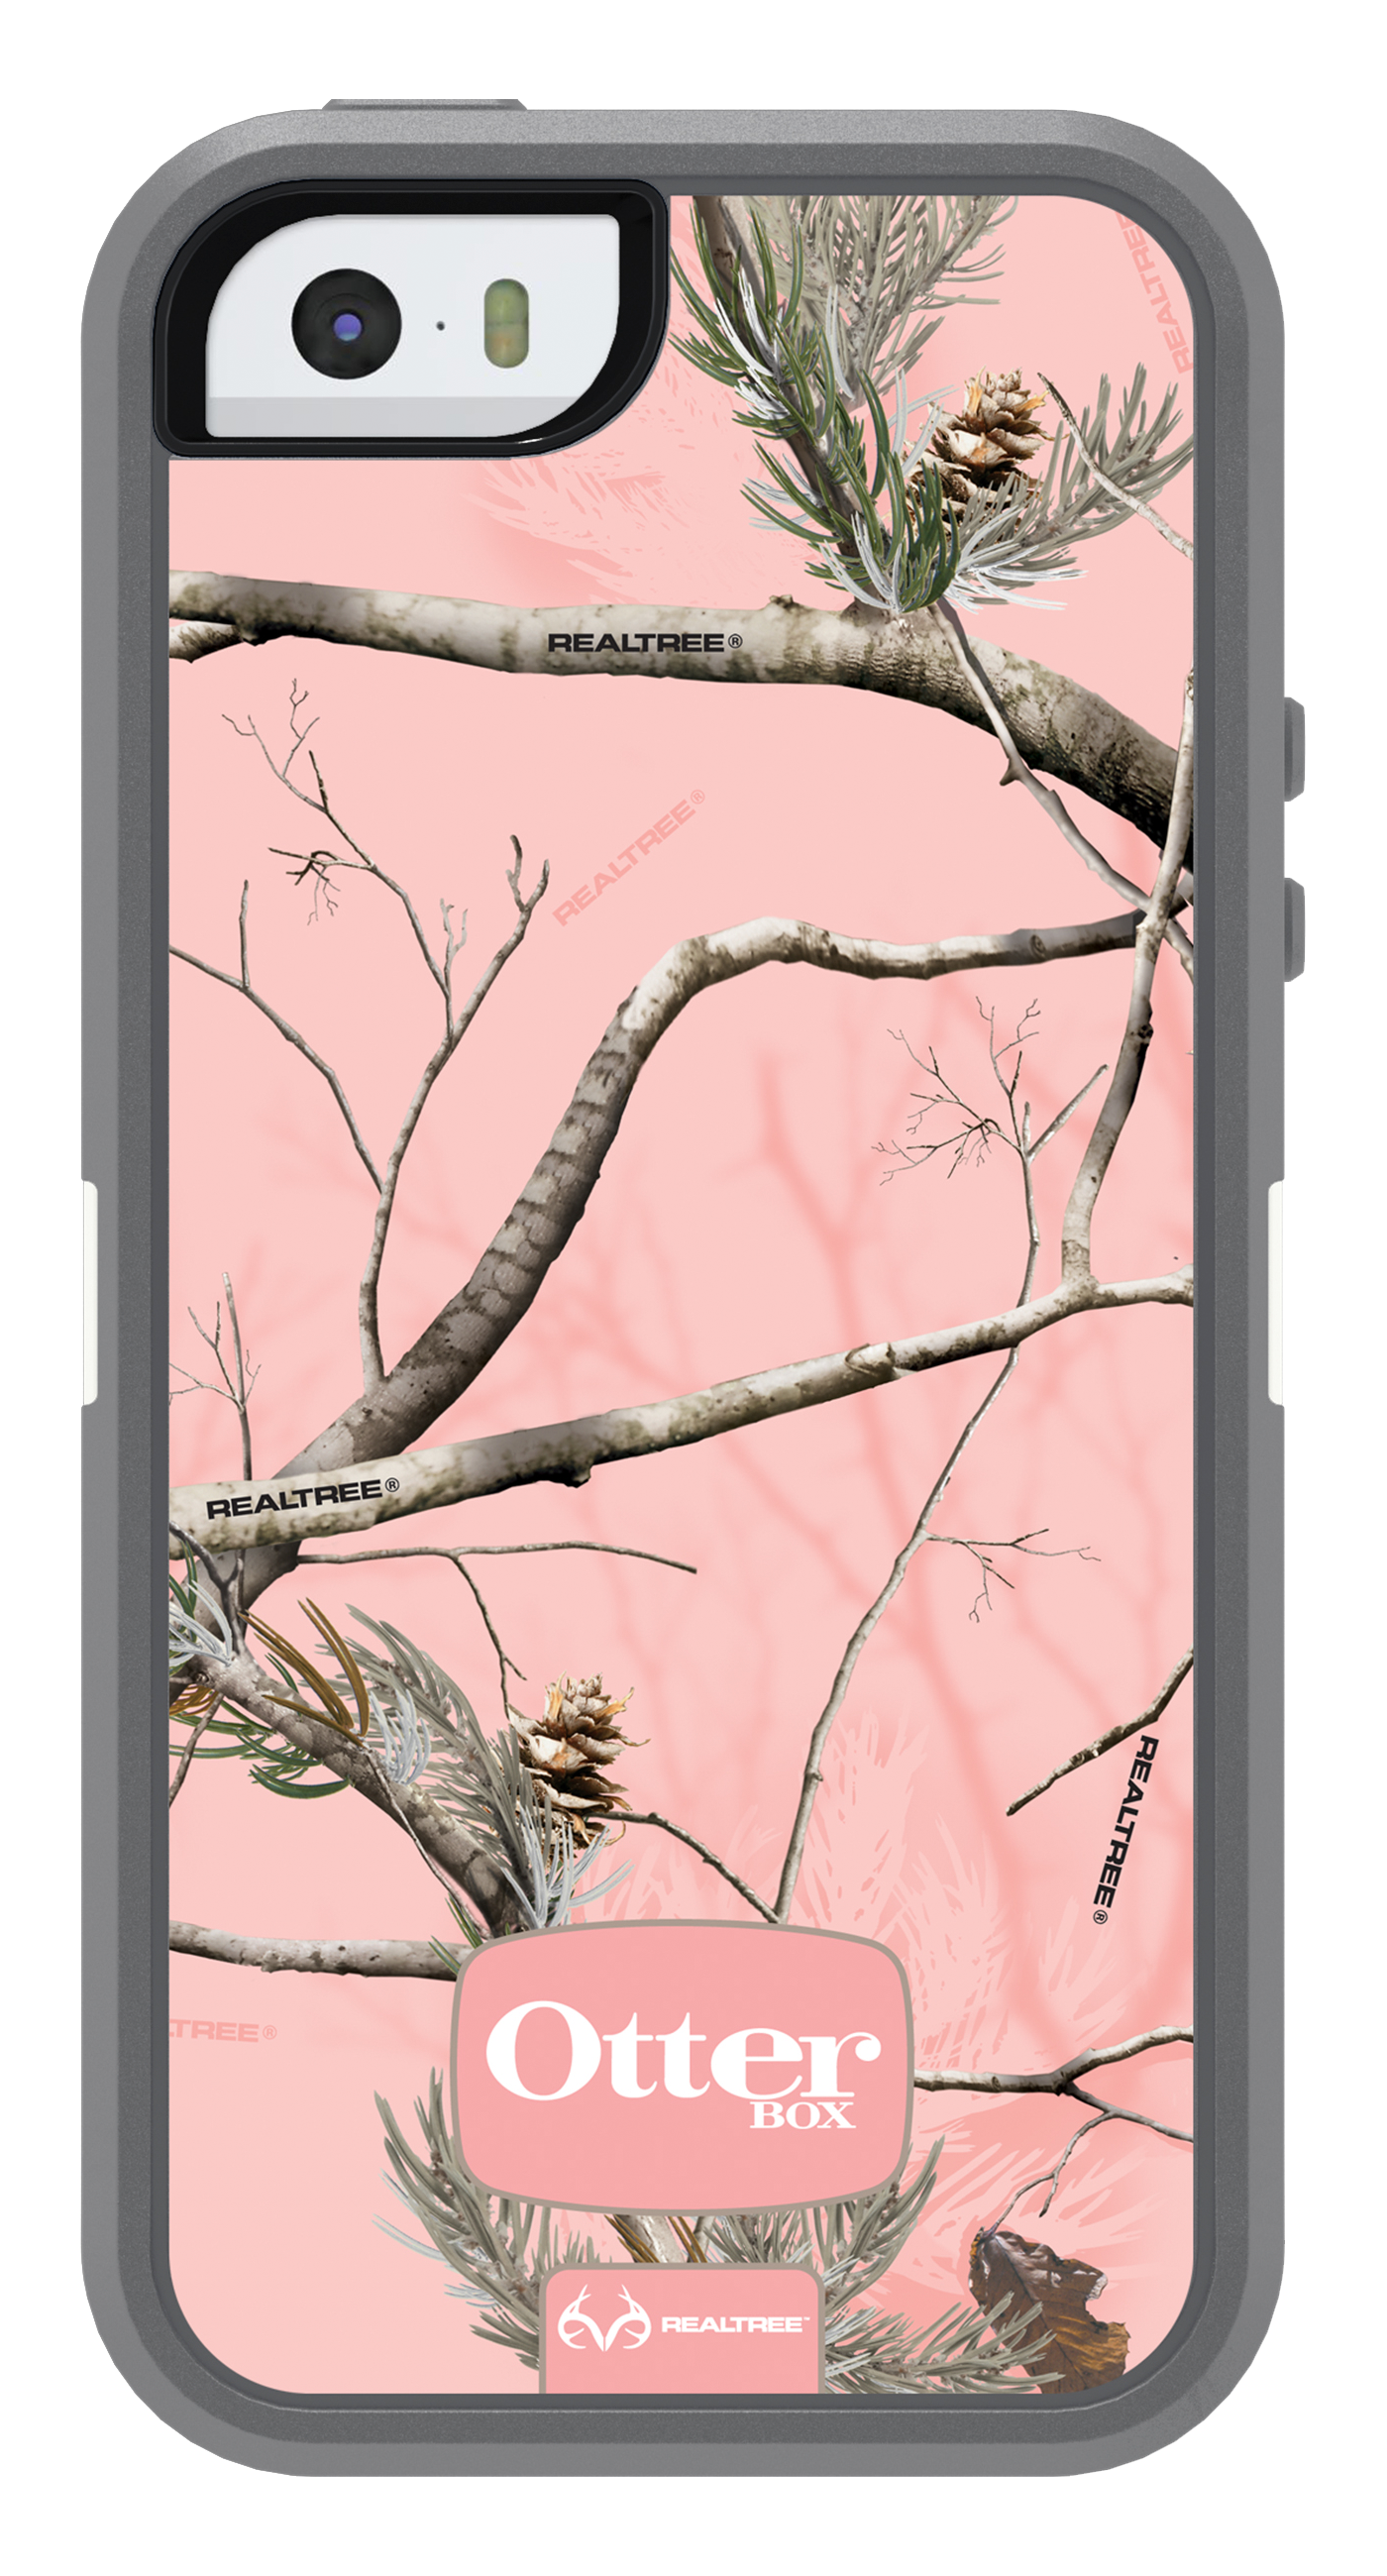 OtterBox 7722522 Defender Case for iPhone 5/5s Realtree Camo AP Pink - image 1 of 10